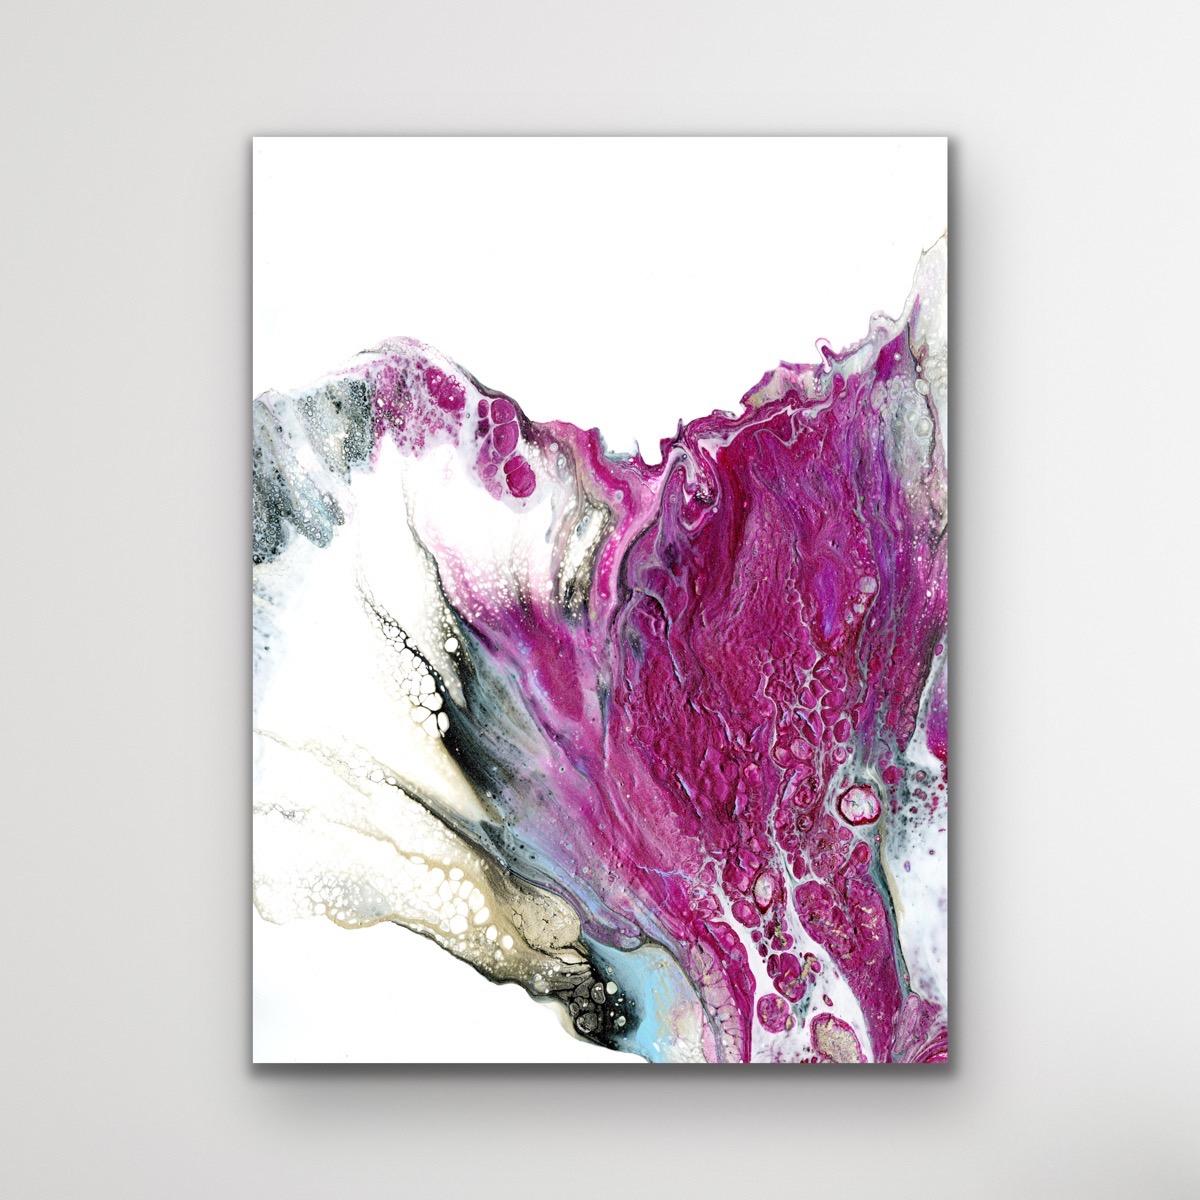 Modern Abstract Fluid Painting, Celeste Reiter, Signed Limited Edition Giclee’